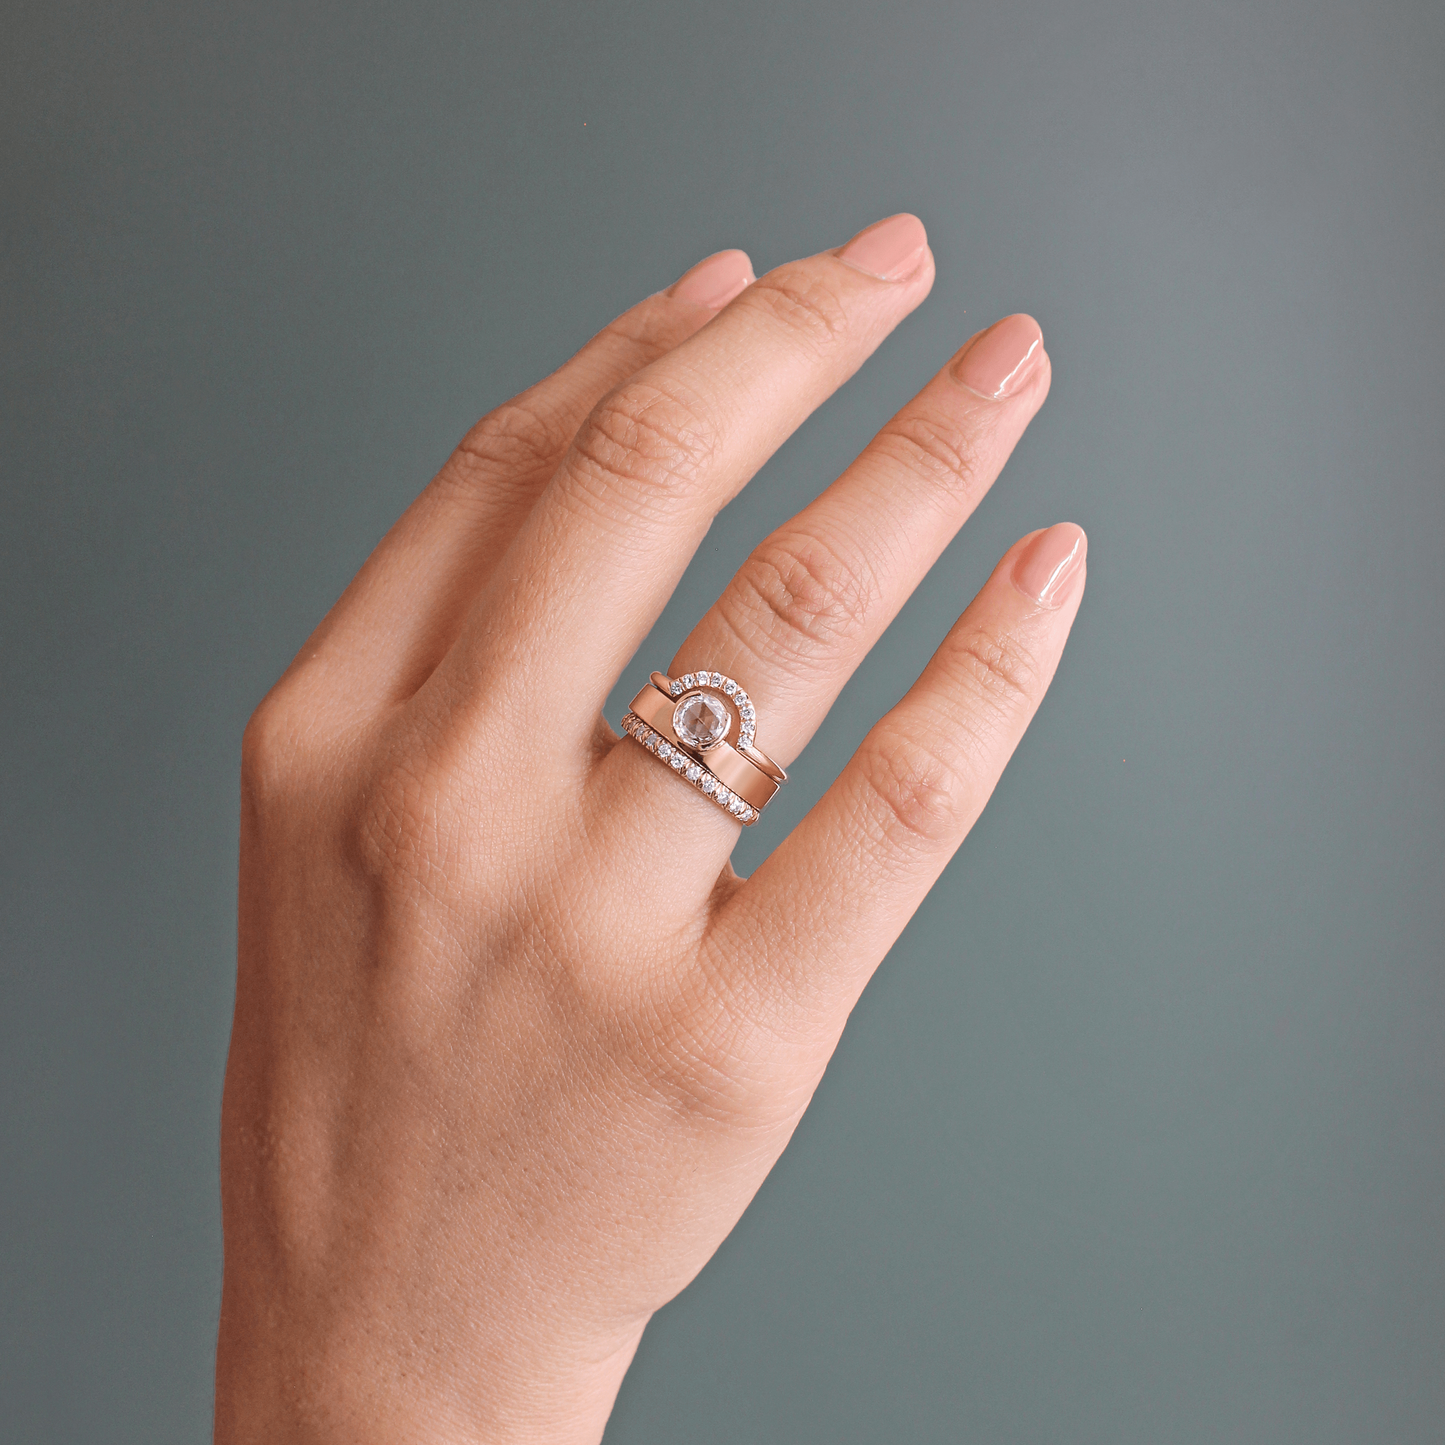 Model wearing a stack of matrimony pieces on ring finger featuring Dome Band / French Pave Diamonds